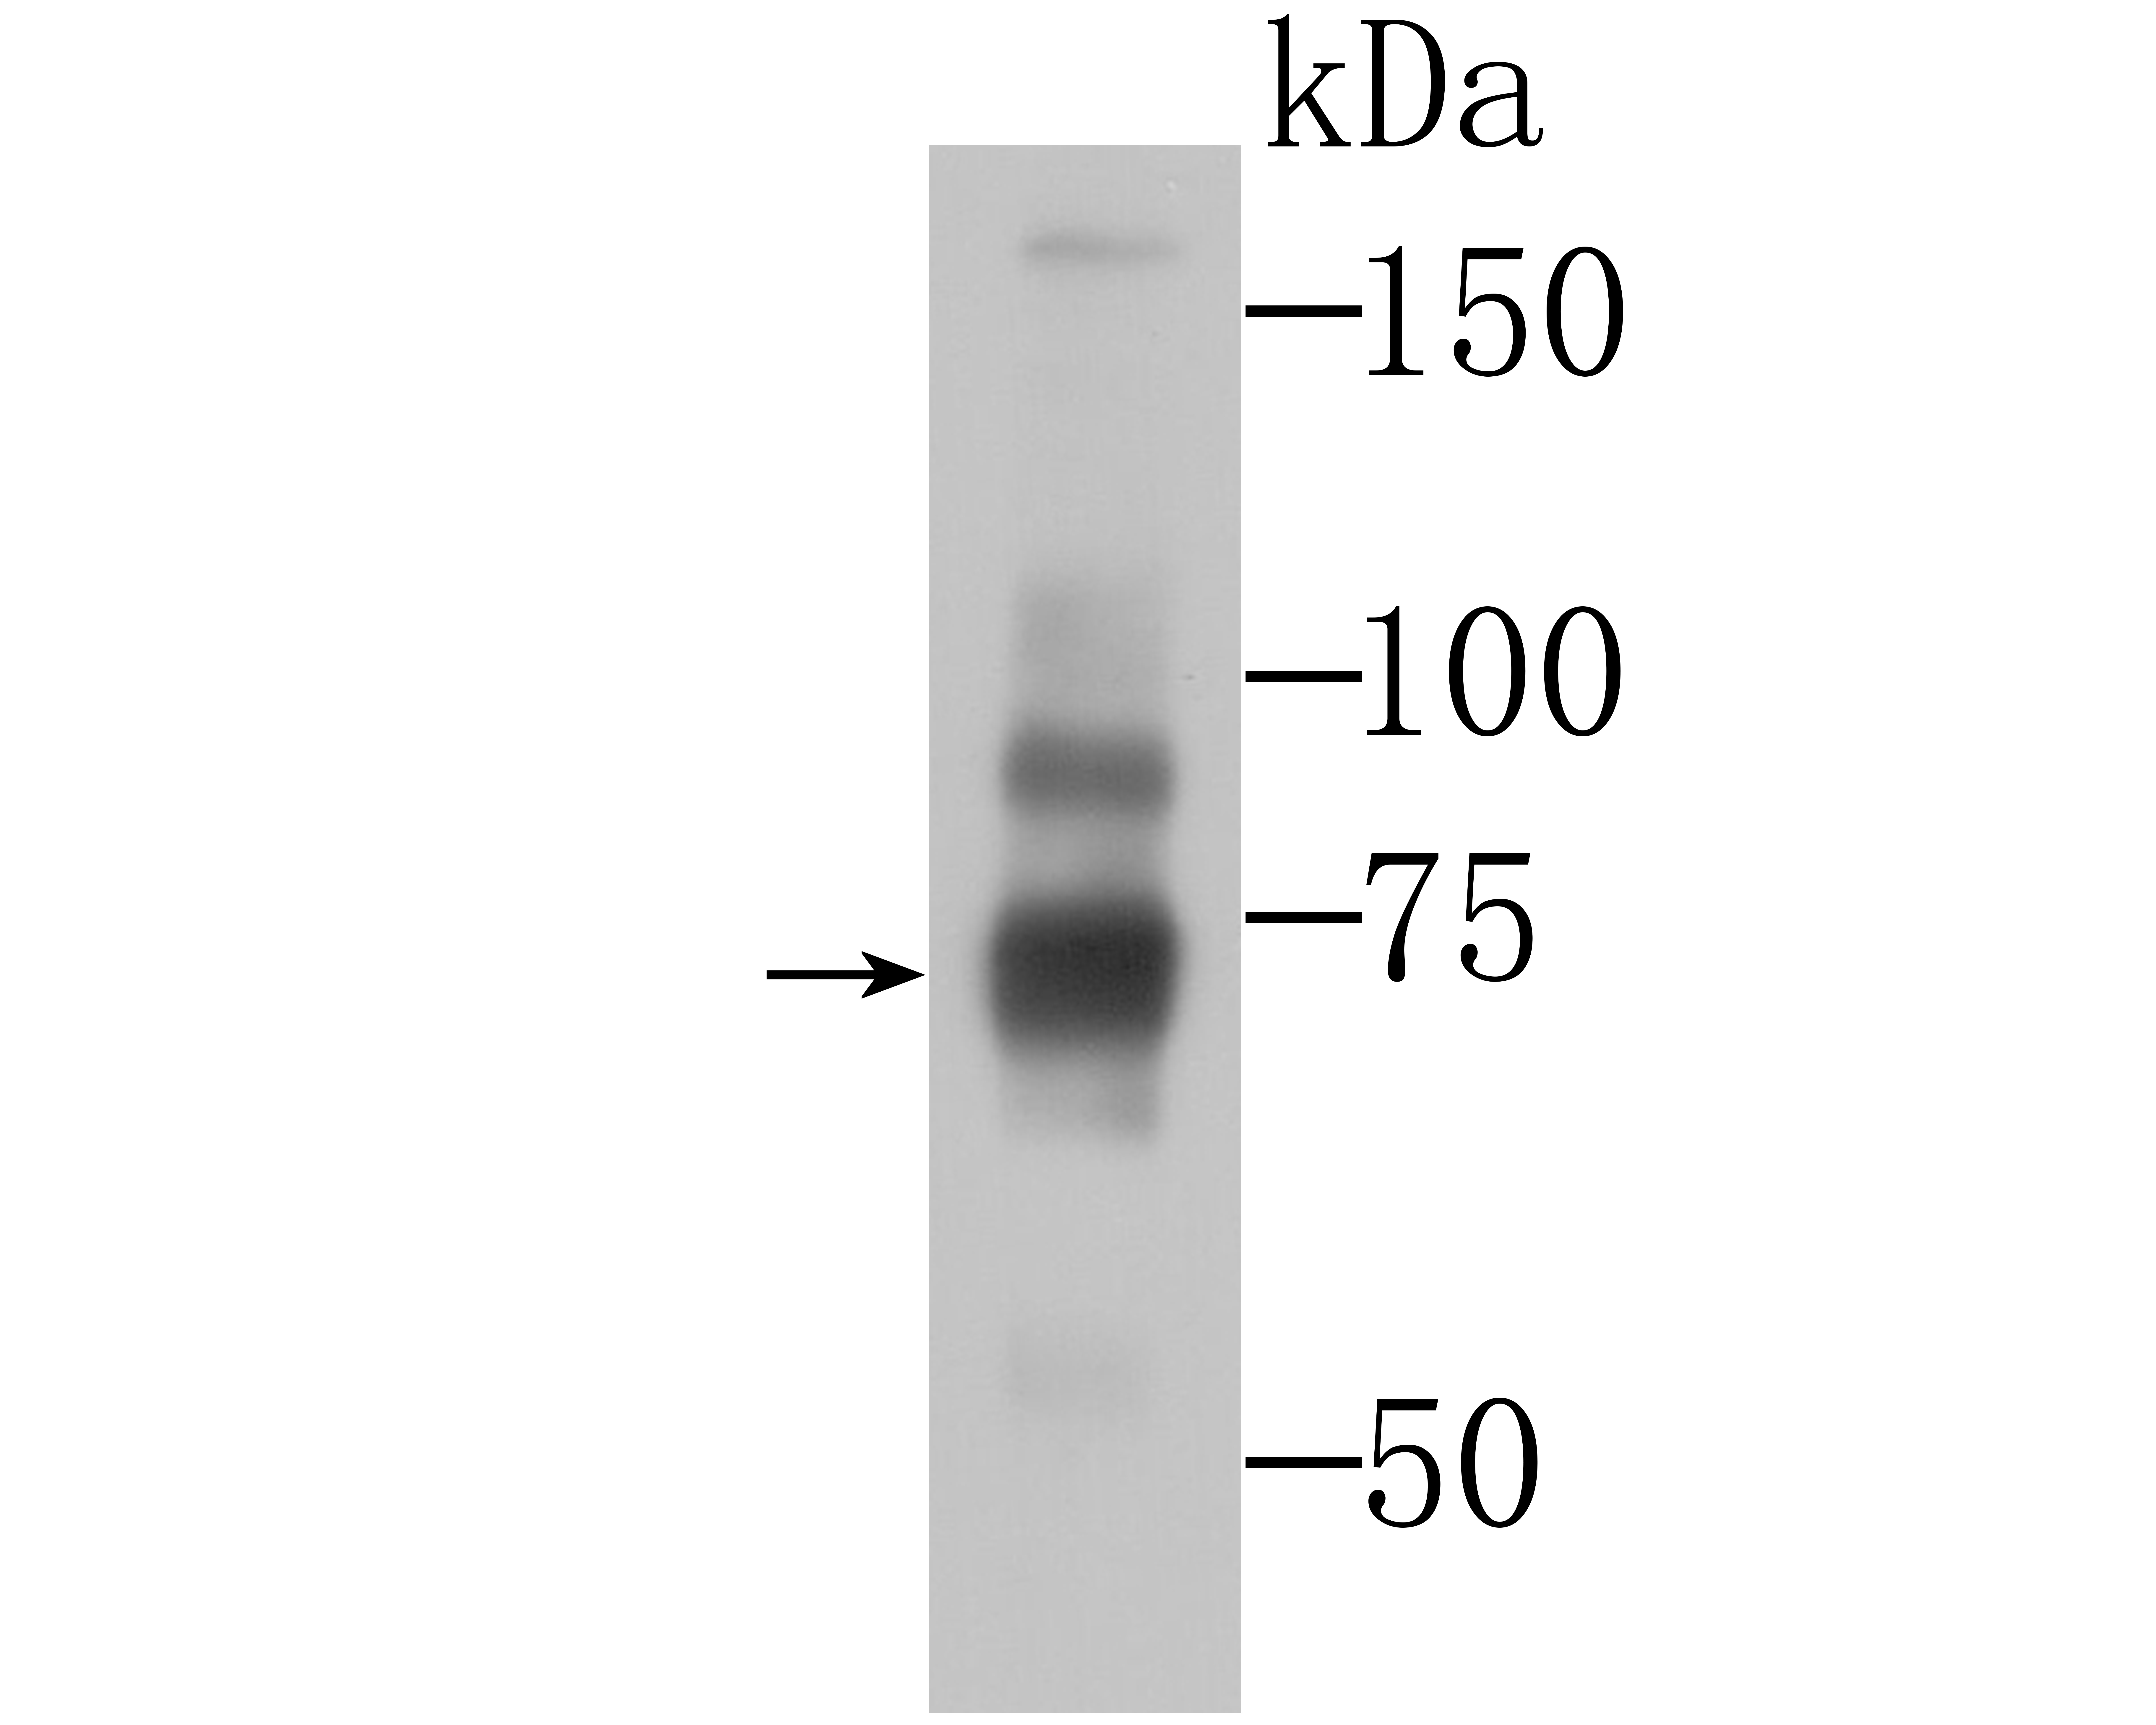 Western blot analysis of BMAL1 on SYSH5Y cell lysates using anti-BMAL1 antibody at 1/1,000 dilution.